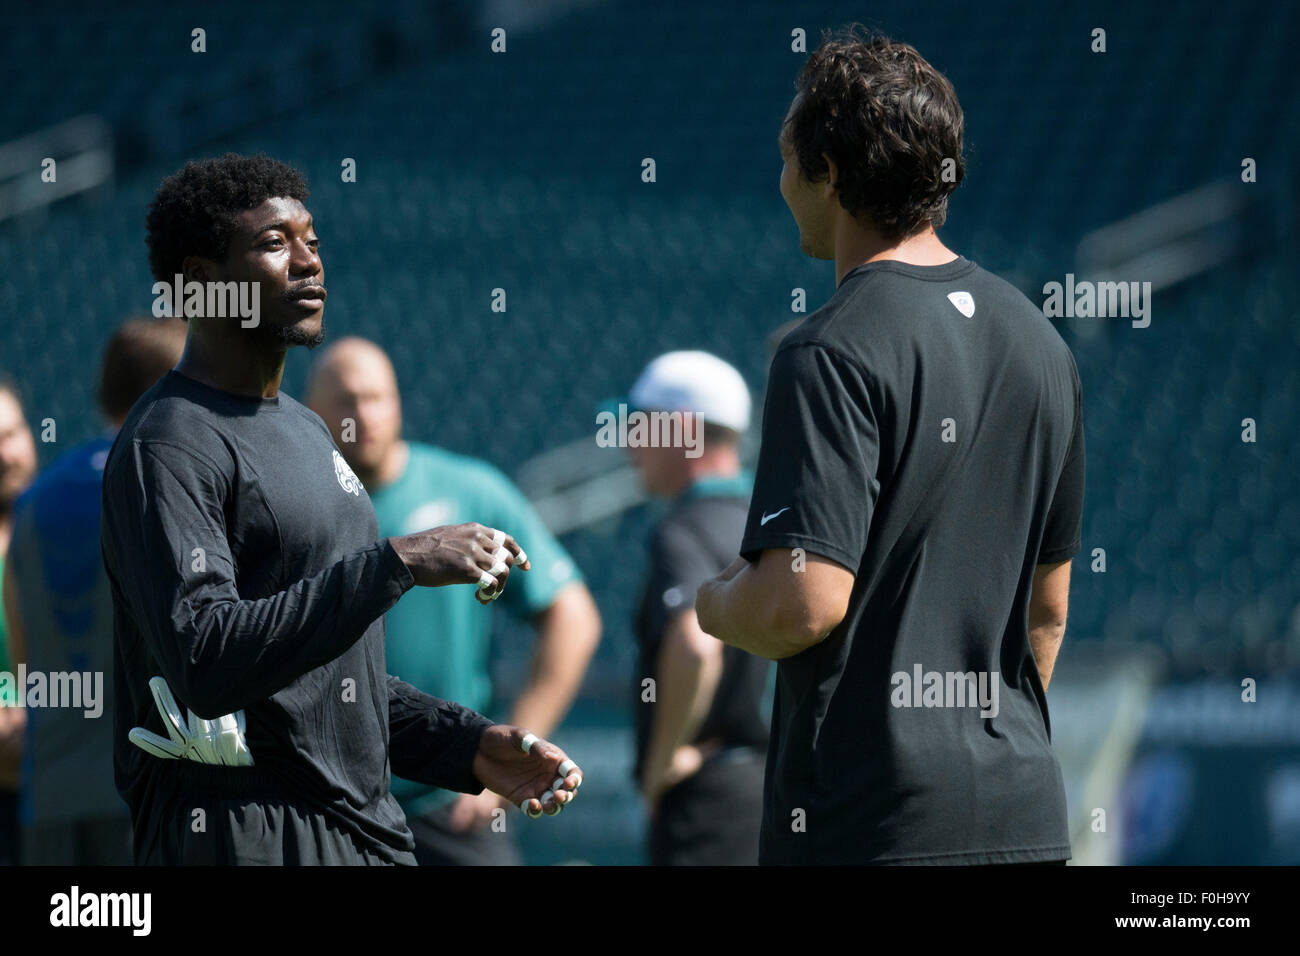 Philadelphia, Pennsylvania, USA. 16th Aug, 2015. Philadelphia Eagles defensive back Byron Maxwell (31) talks with quarterback Sam Bradford (7) during warm-ups prior to the NFL game between the Indianapolis Colts and the Philadelphia Eagles at Lincoln Financial Field in Philadelphia, Pennsylvania. Christopher Szagola/CSM/Alamy Live News Stock Photo